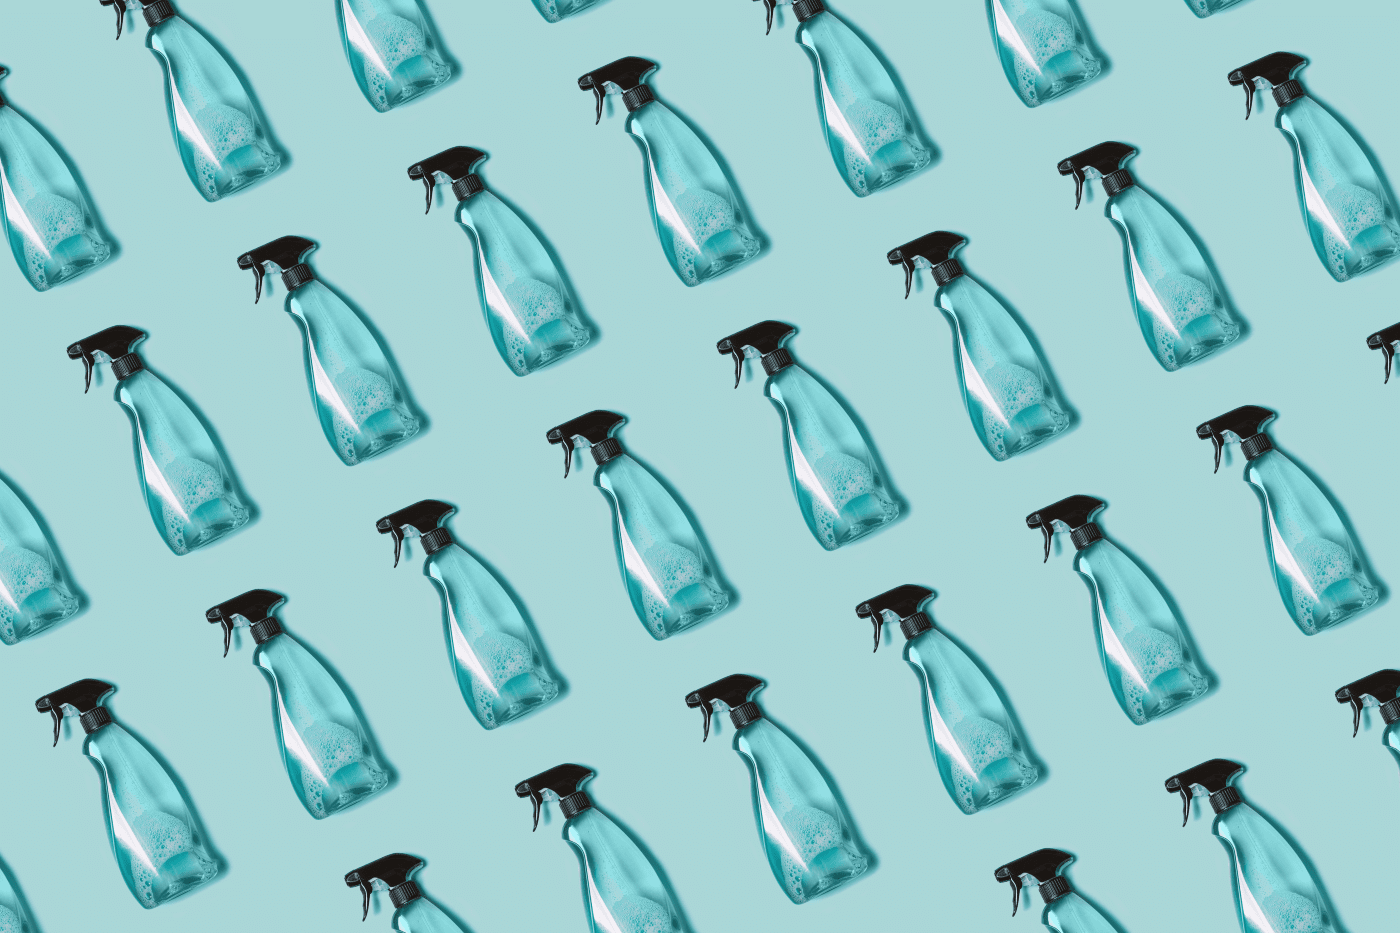 Is your cleaning product really eco-friendly?